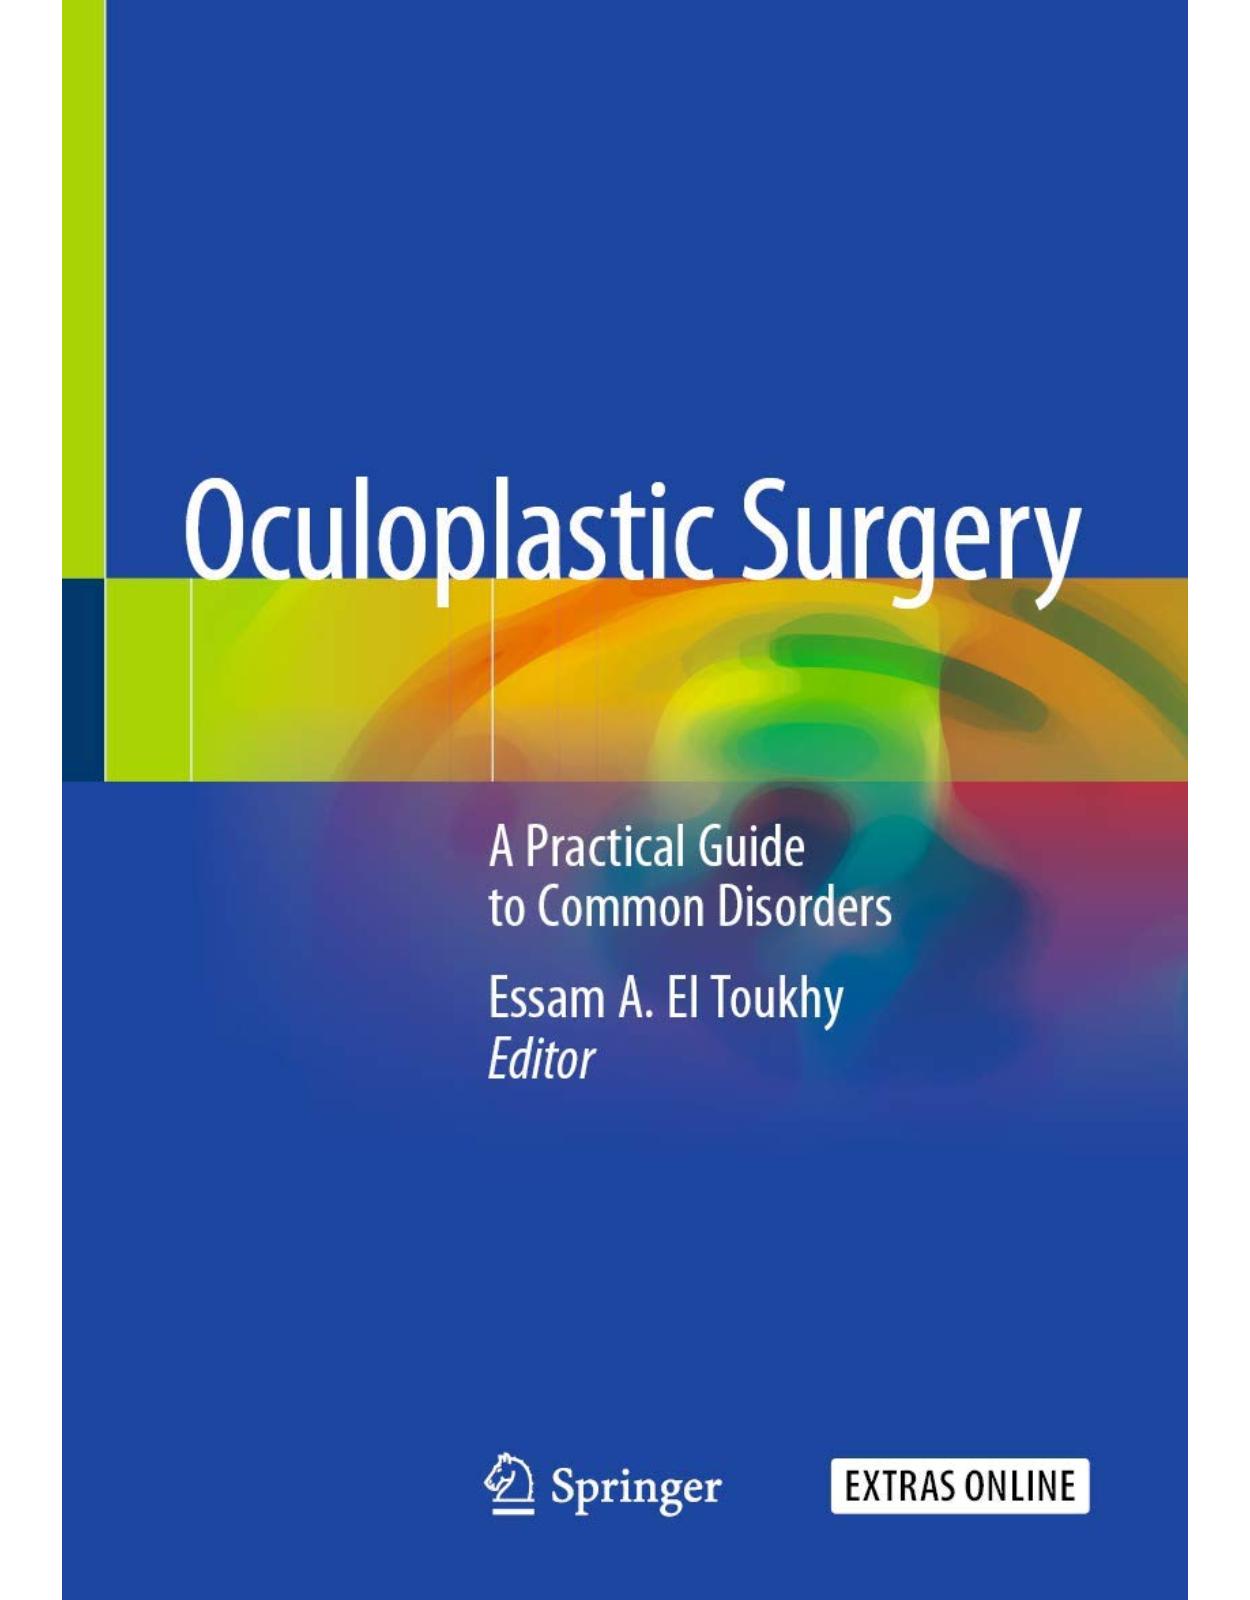 Oculoplastic Surgery: A Practical Guide to Common Disorders